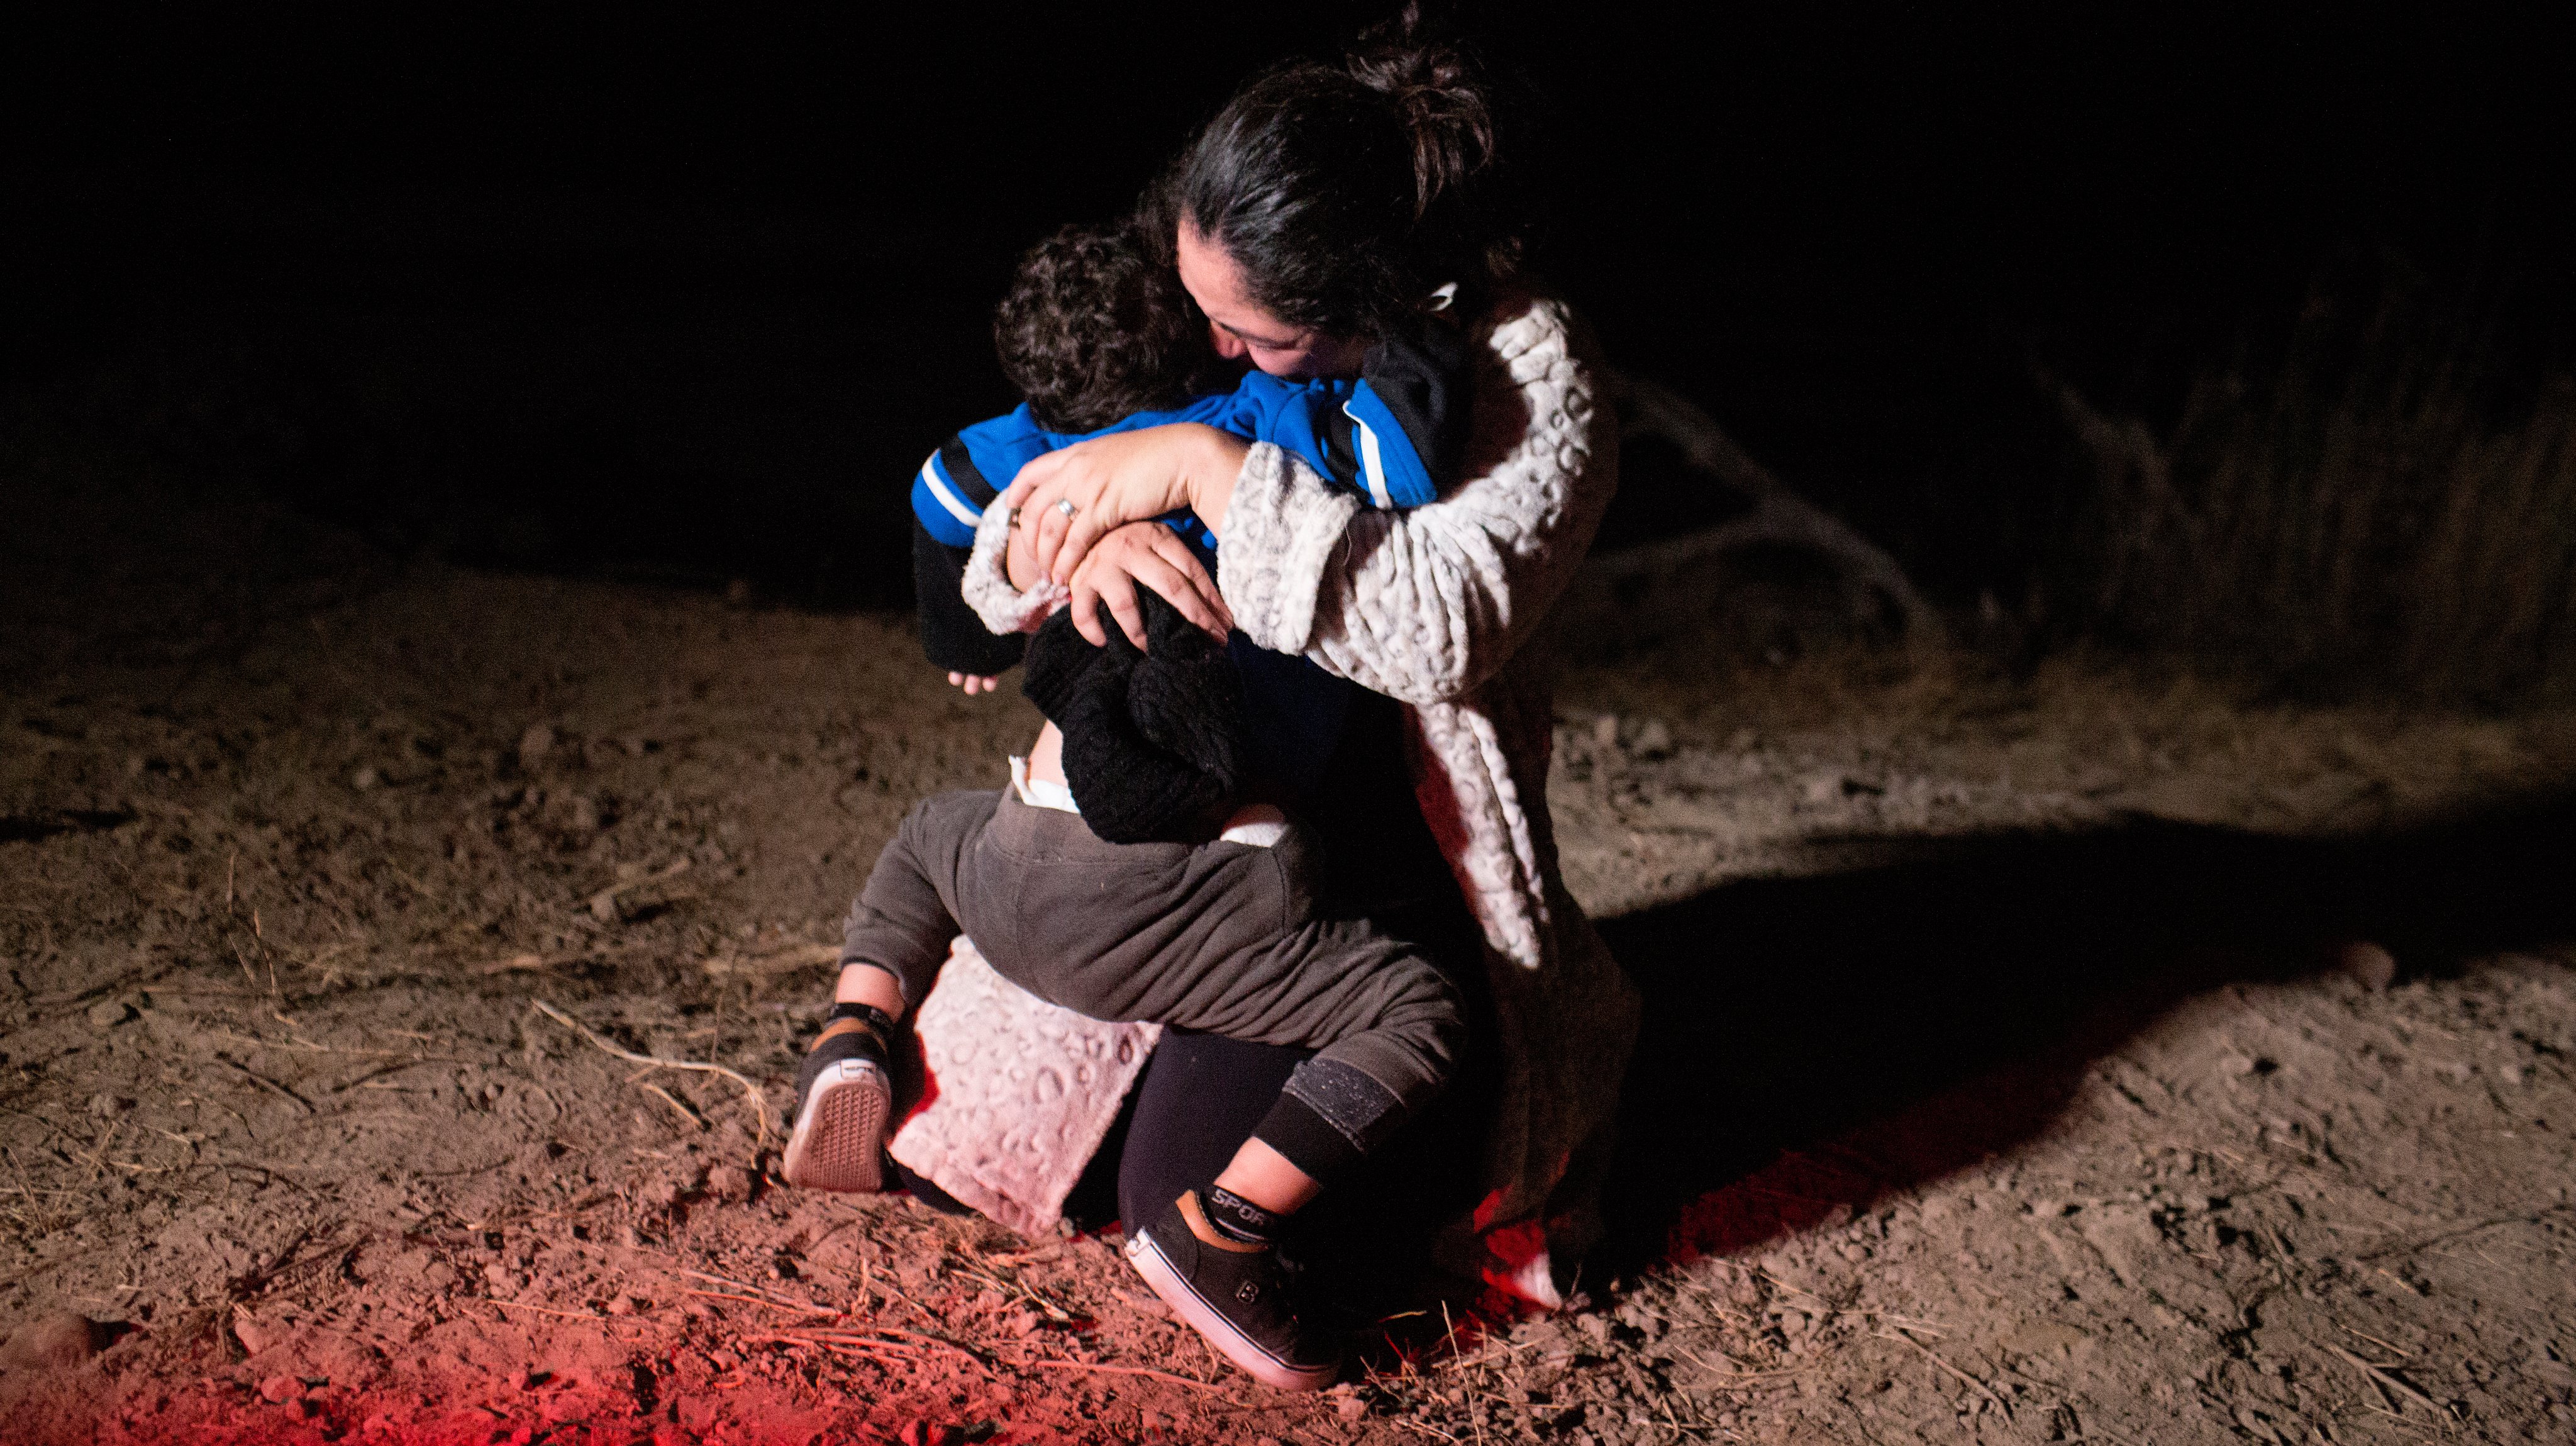 Refugee families cross into the United States along the Mexican Border